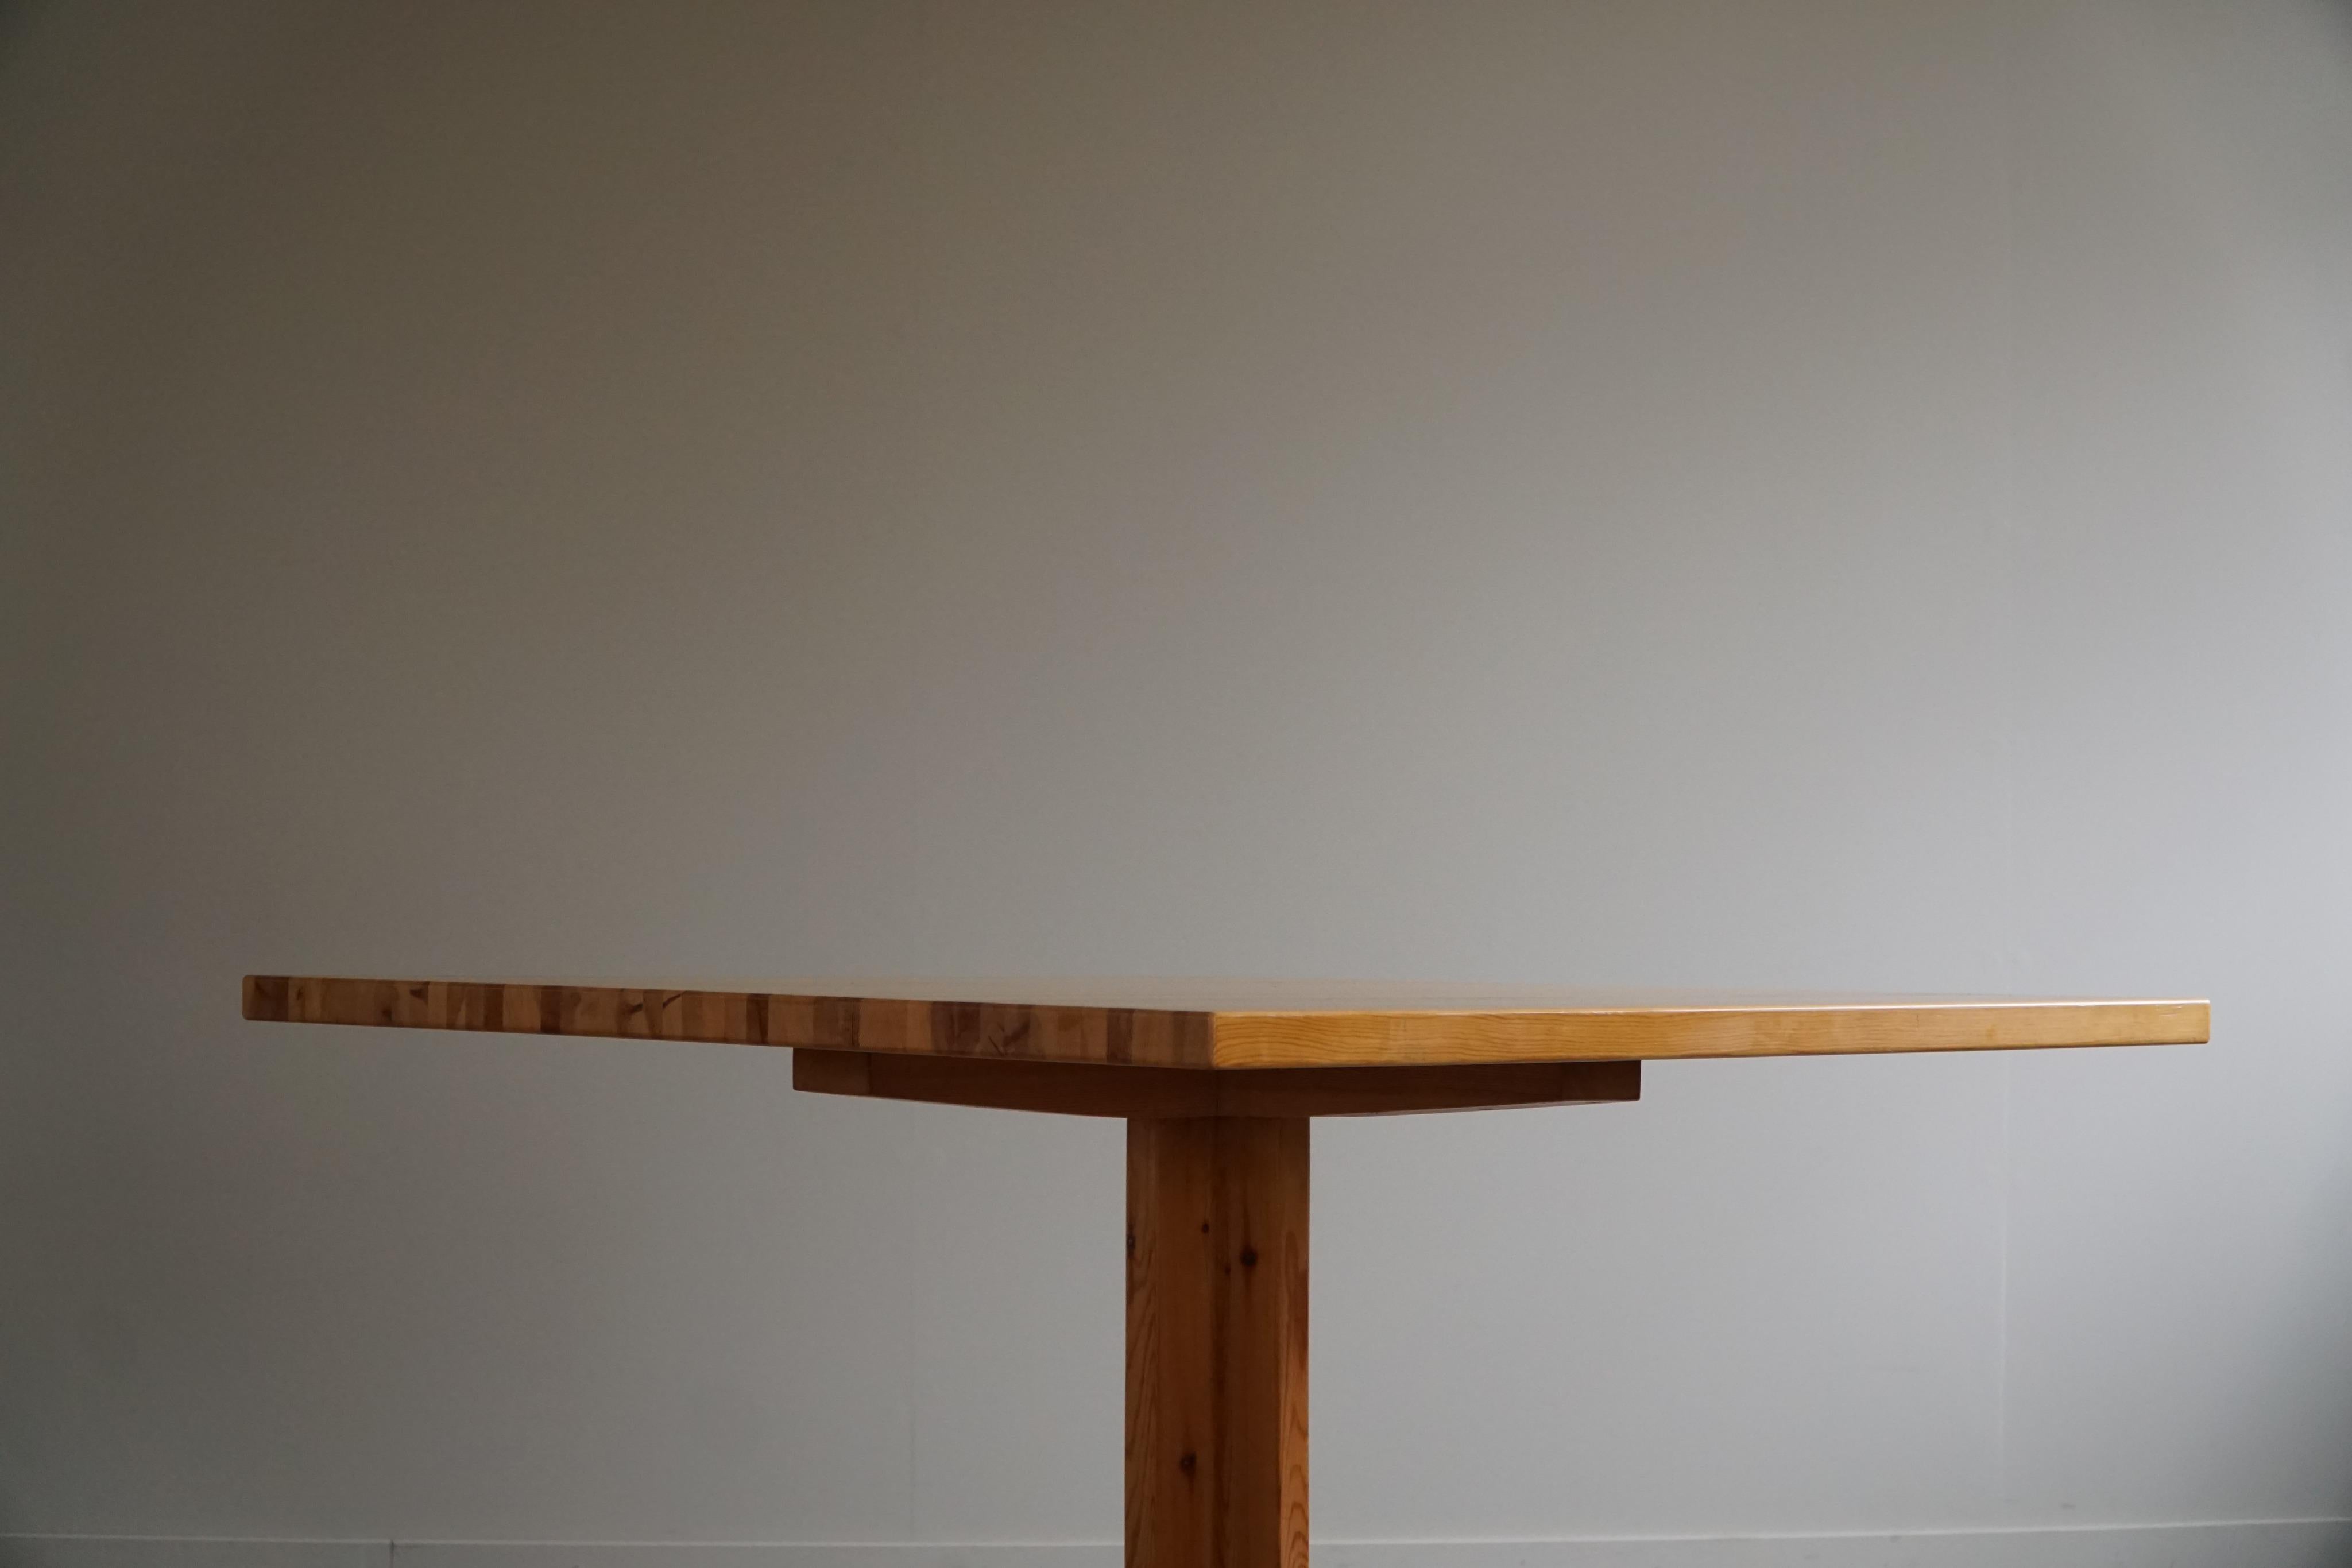 Midcentury Square Dining Room Table in Pine, Danish Cabinetmaker, 1970s For Sale 7